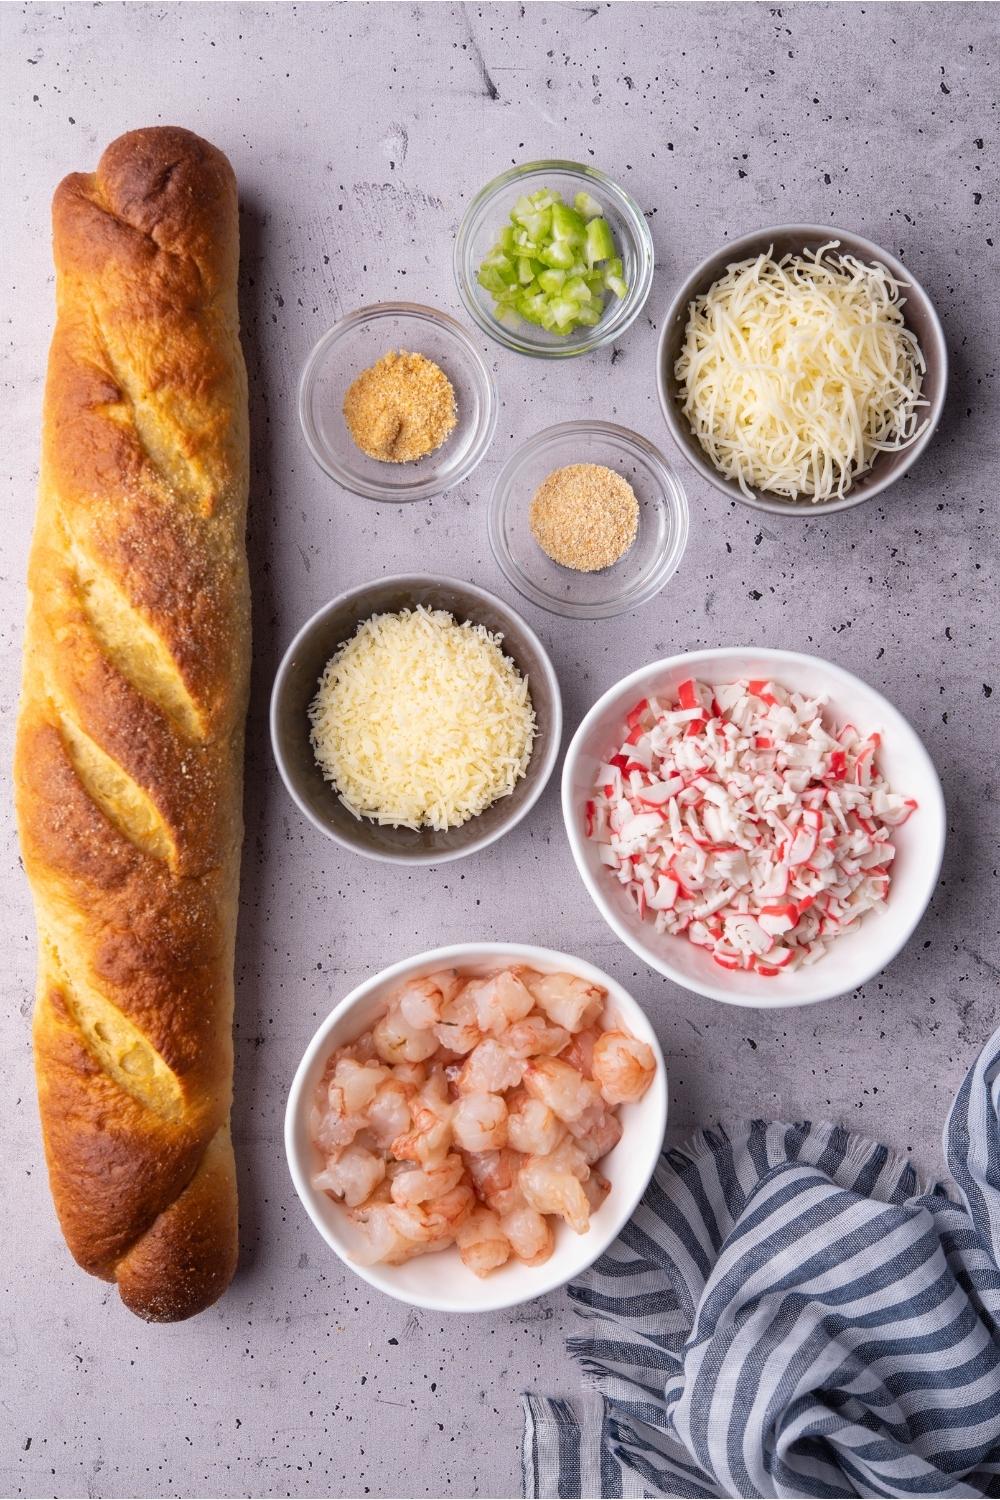 An assortment of ingredients for Vietnamese shrimp toast including a French baguette, uncooked shrimp, imitation crab, cheese, celery, and seasonings.